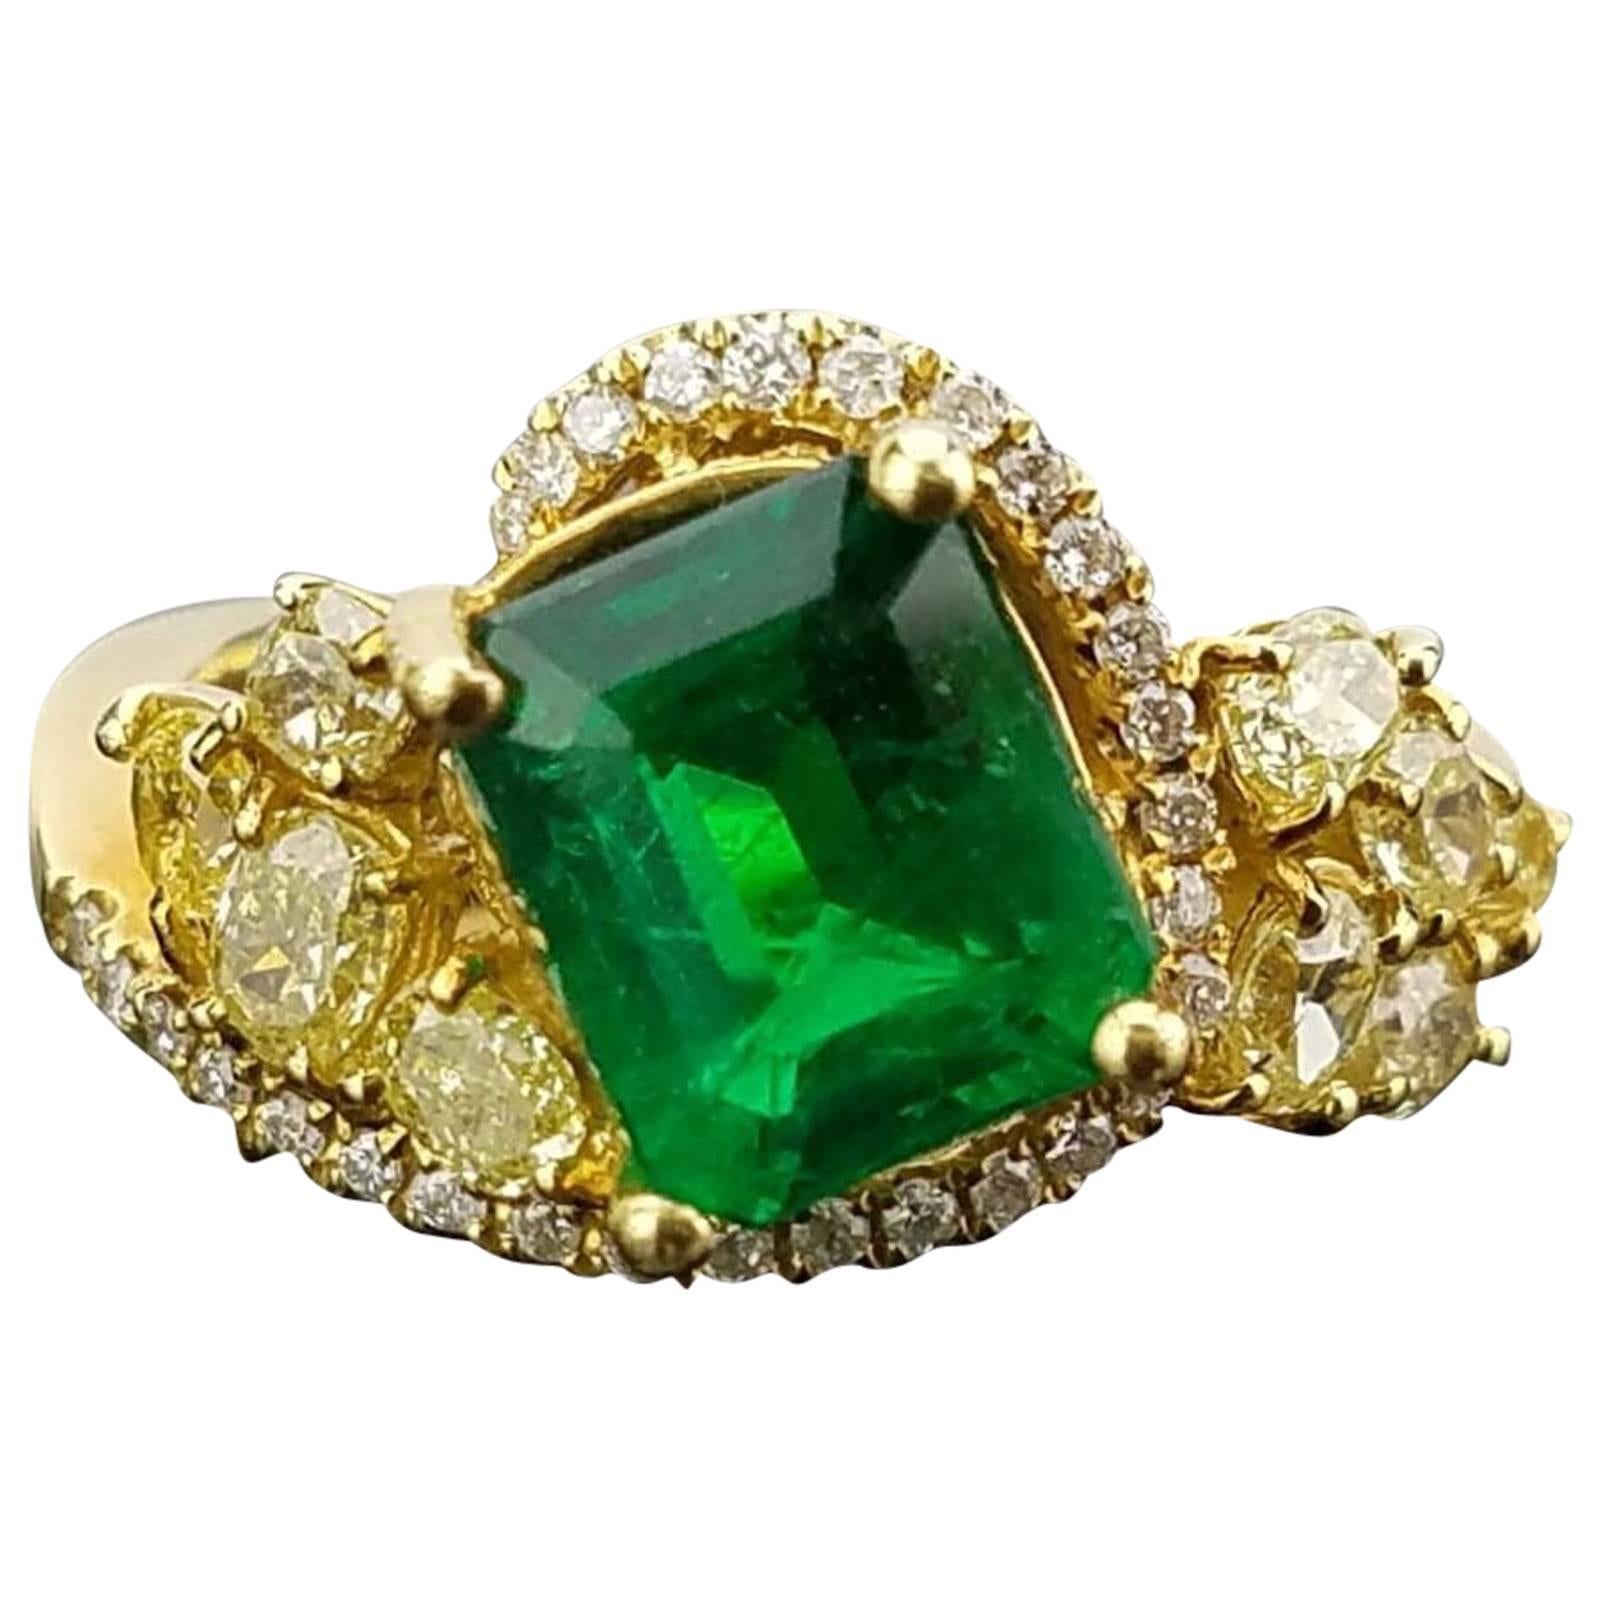 Zambian Emerald and Colored Diamond Cocktail Ring